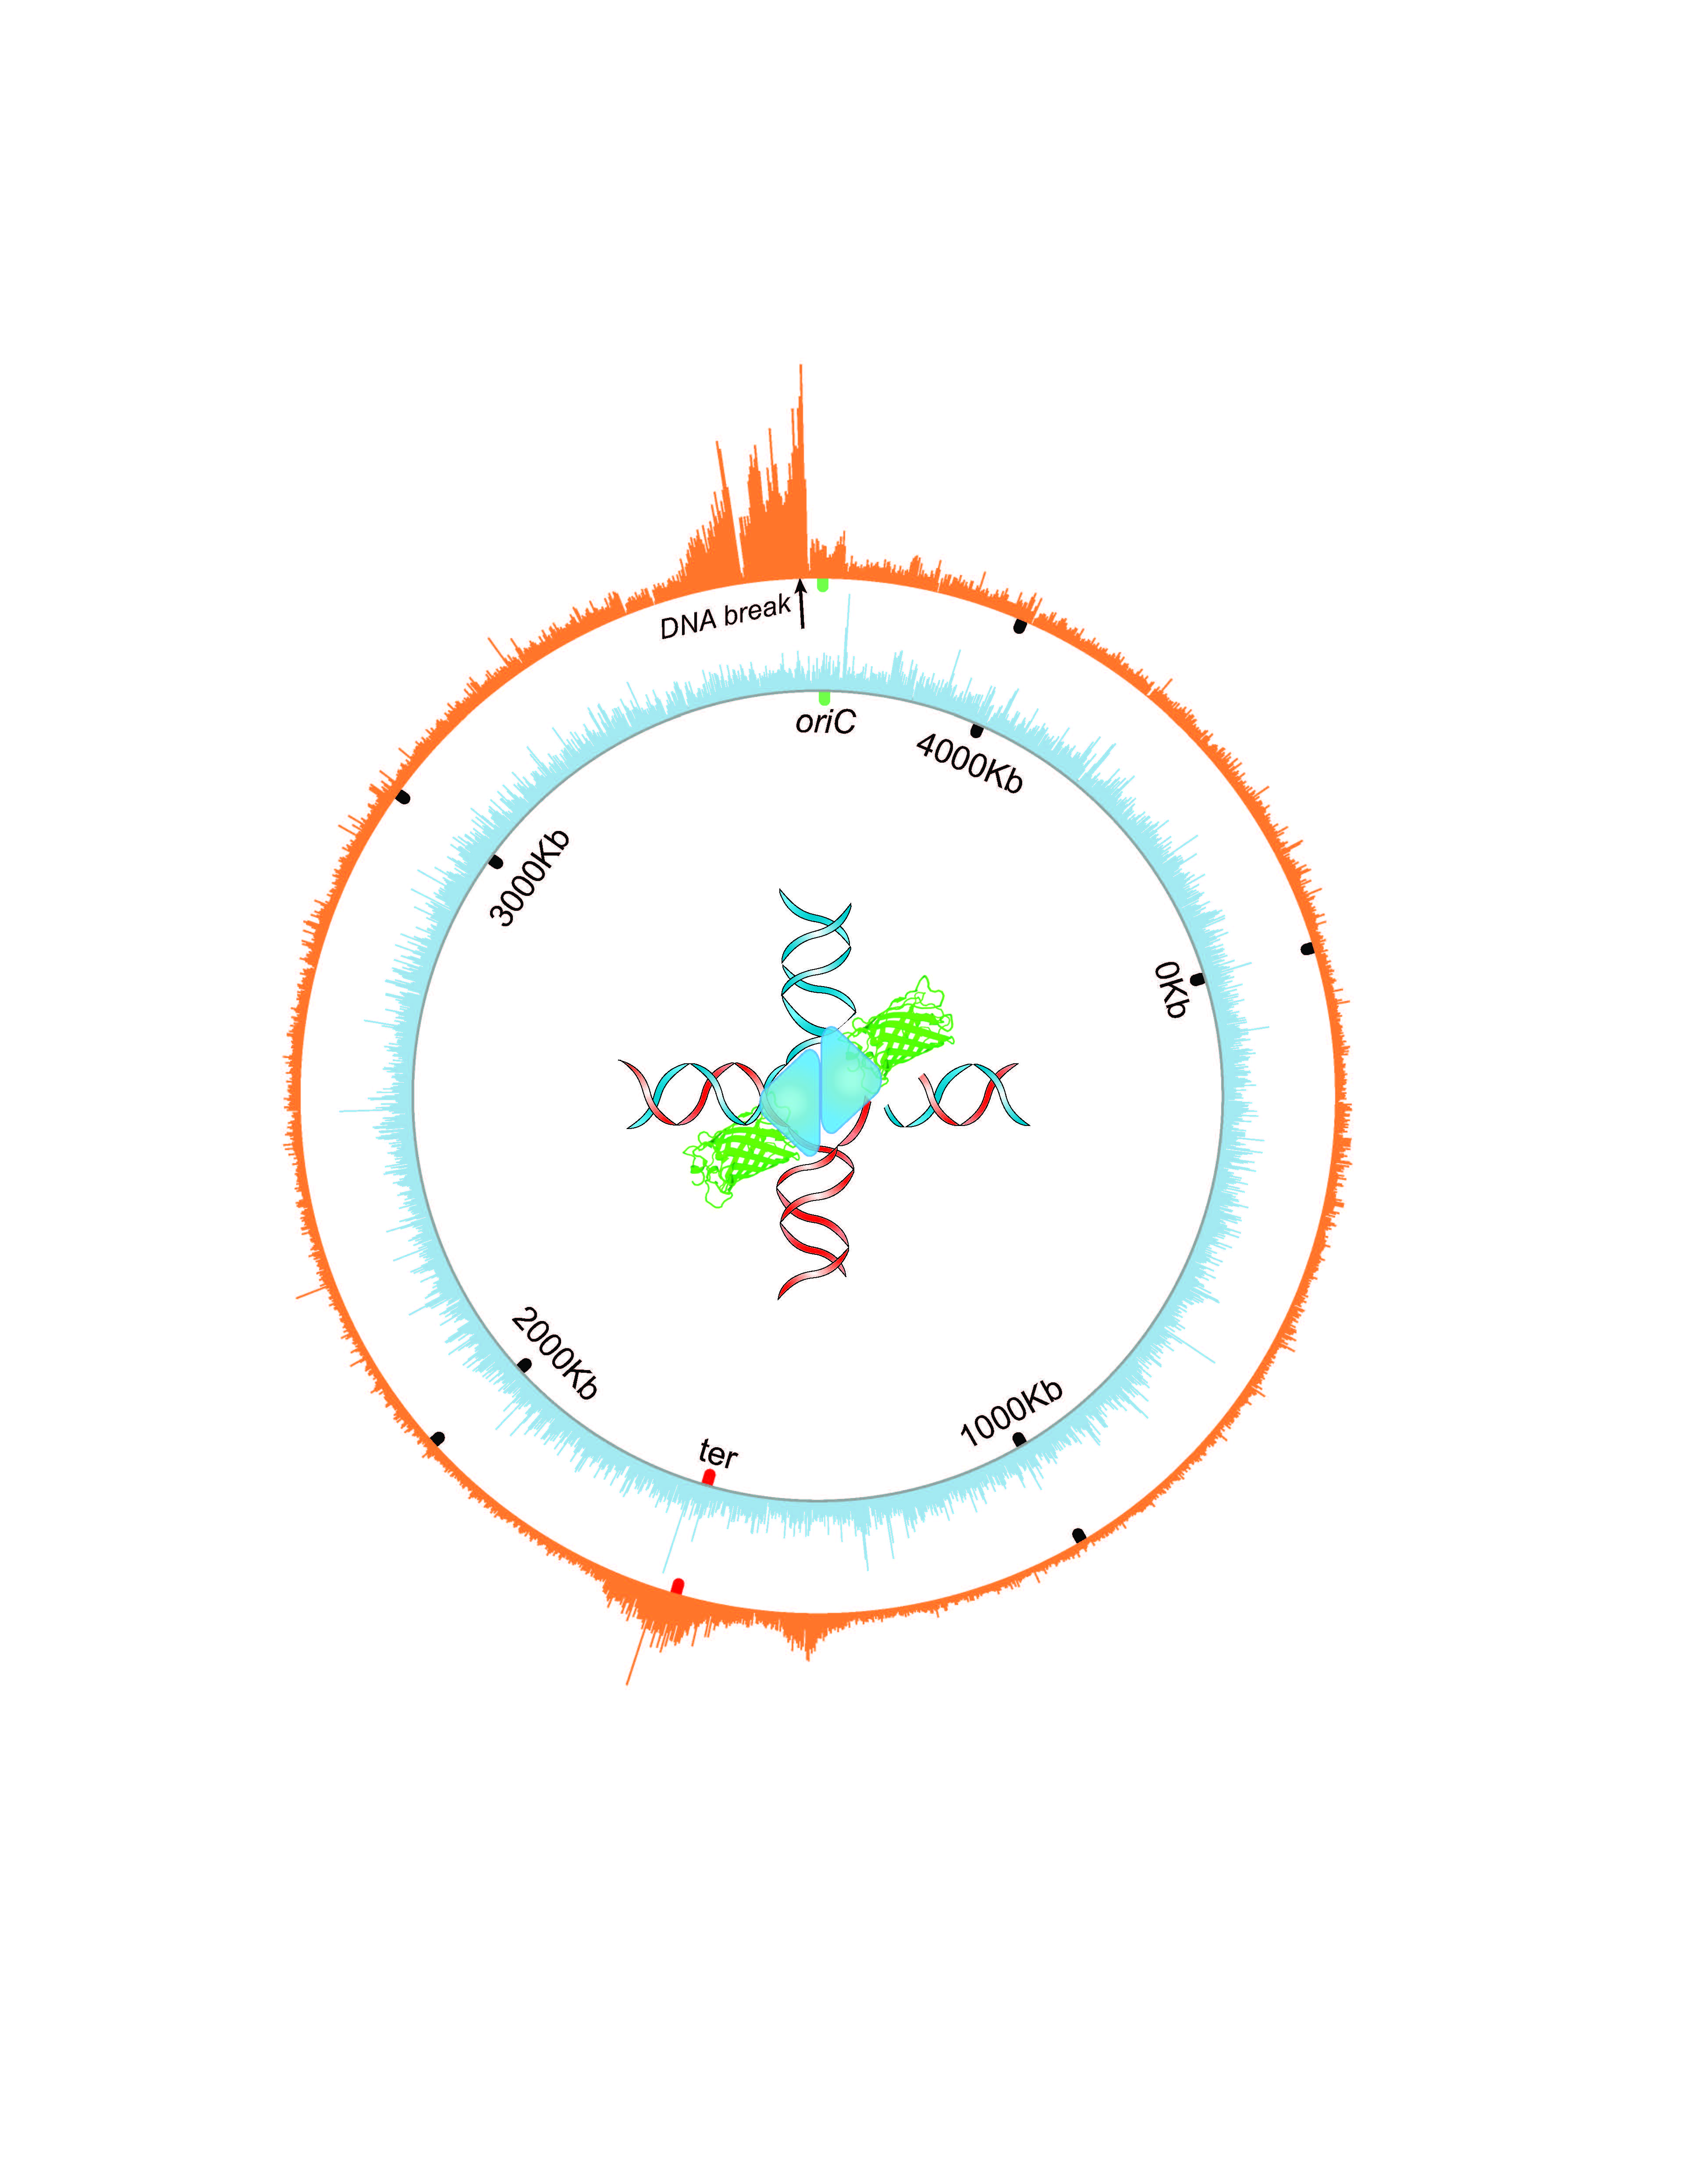 Orange wheel shows the circular chromosome of E. coli bacteria. The spikes indicate where a molecular intermediate in DNA repair – four-way DNA junctions – accumulate near a reparable double strand break in the DNA. (Jun Xia/BCM & Qian Mei/Rice University)